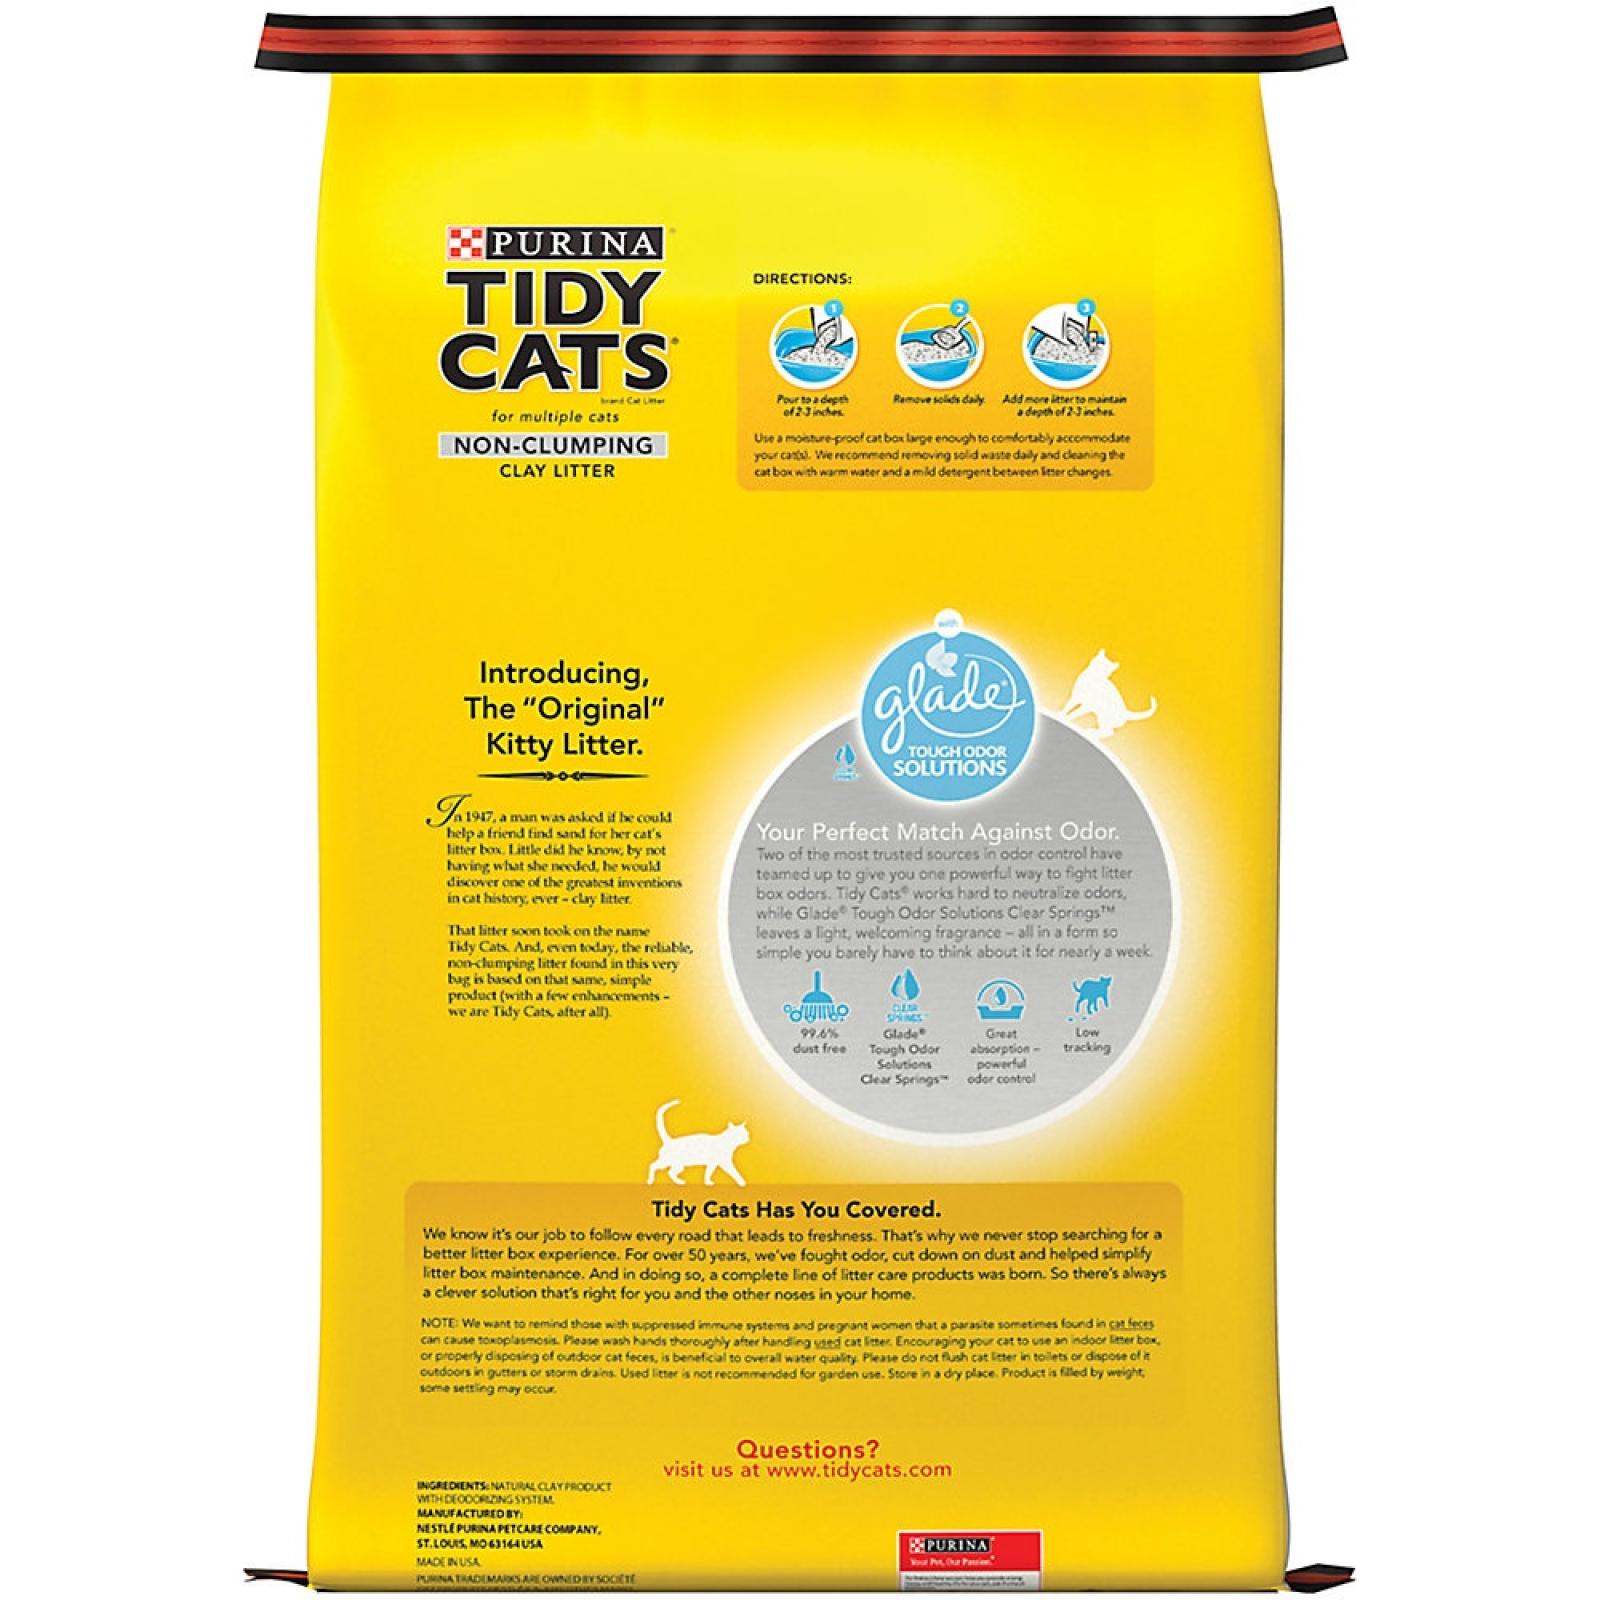 Purina Tidy Cats Non-Clumping Clay Litter with Glade